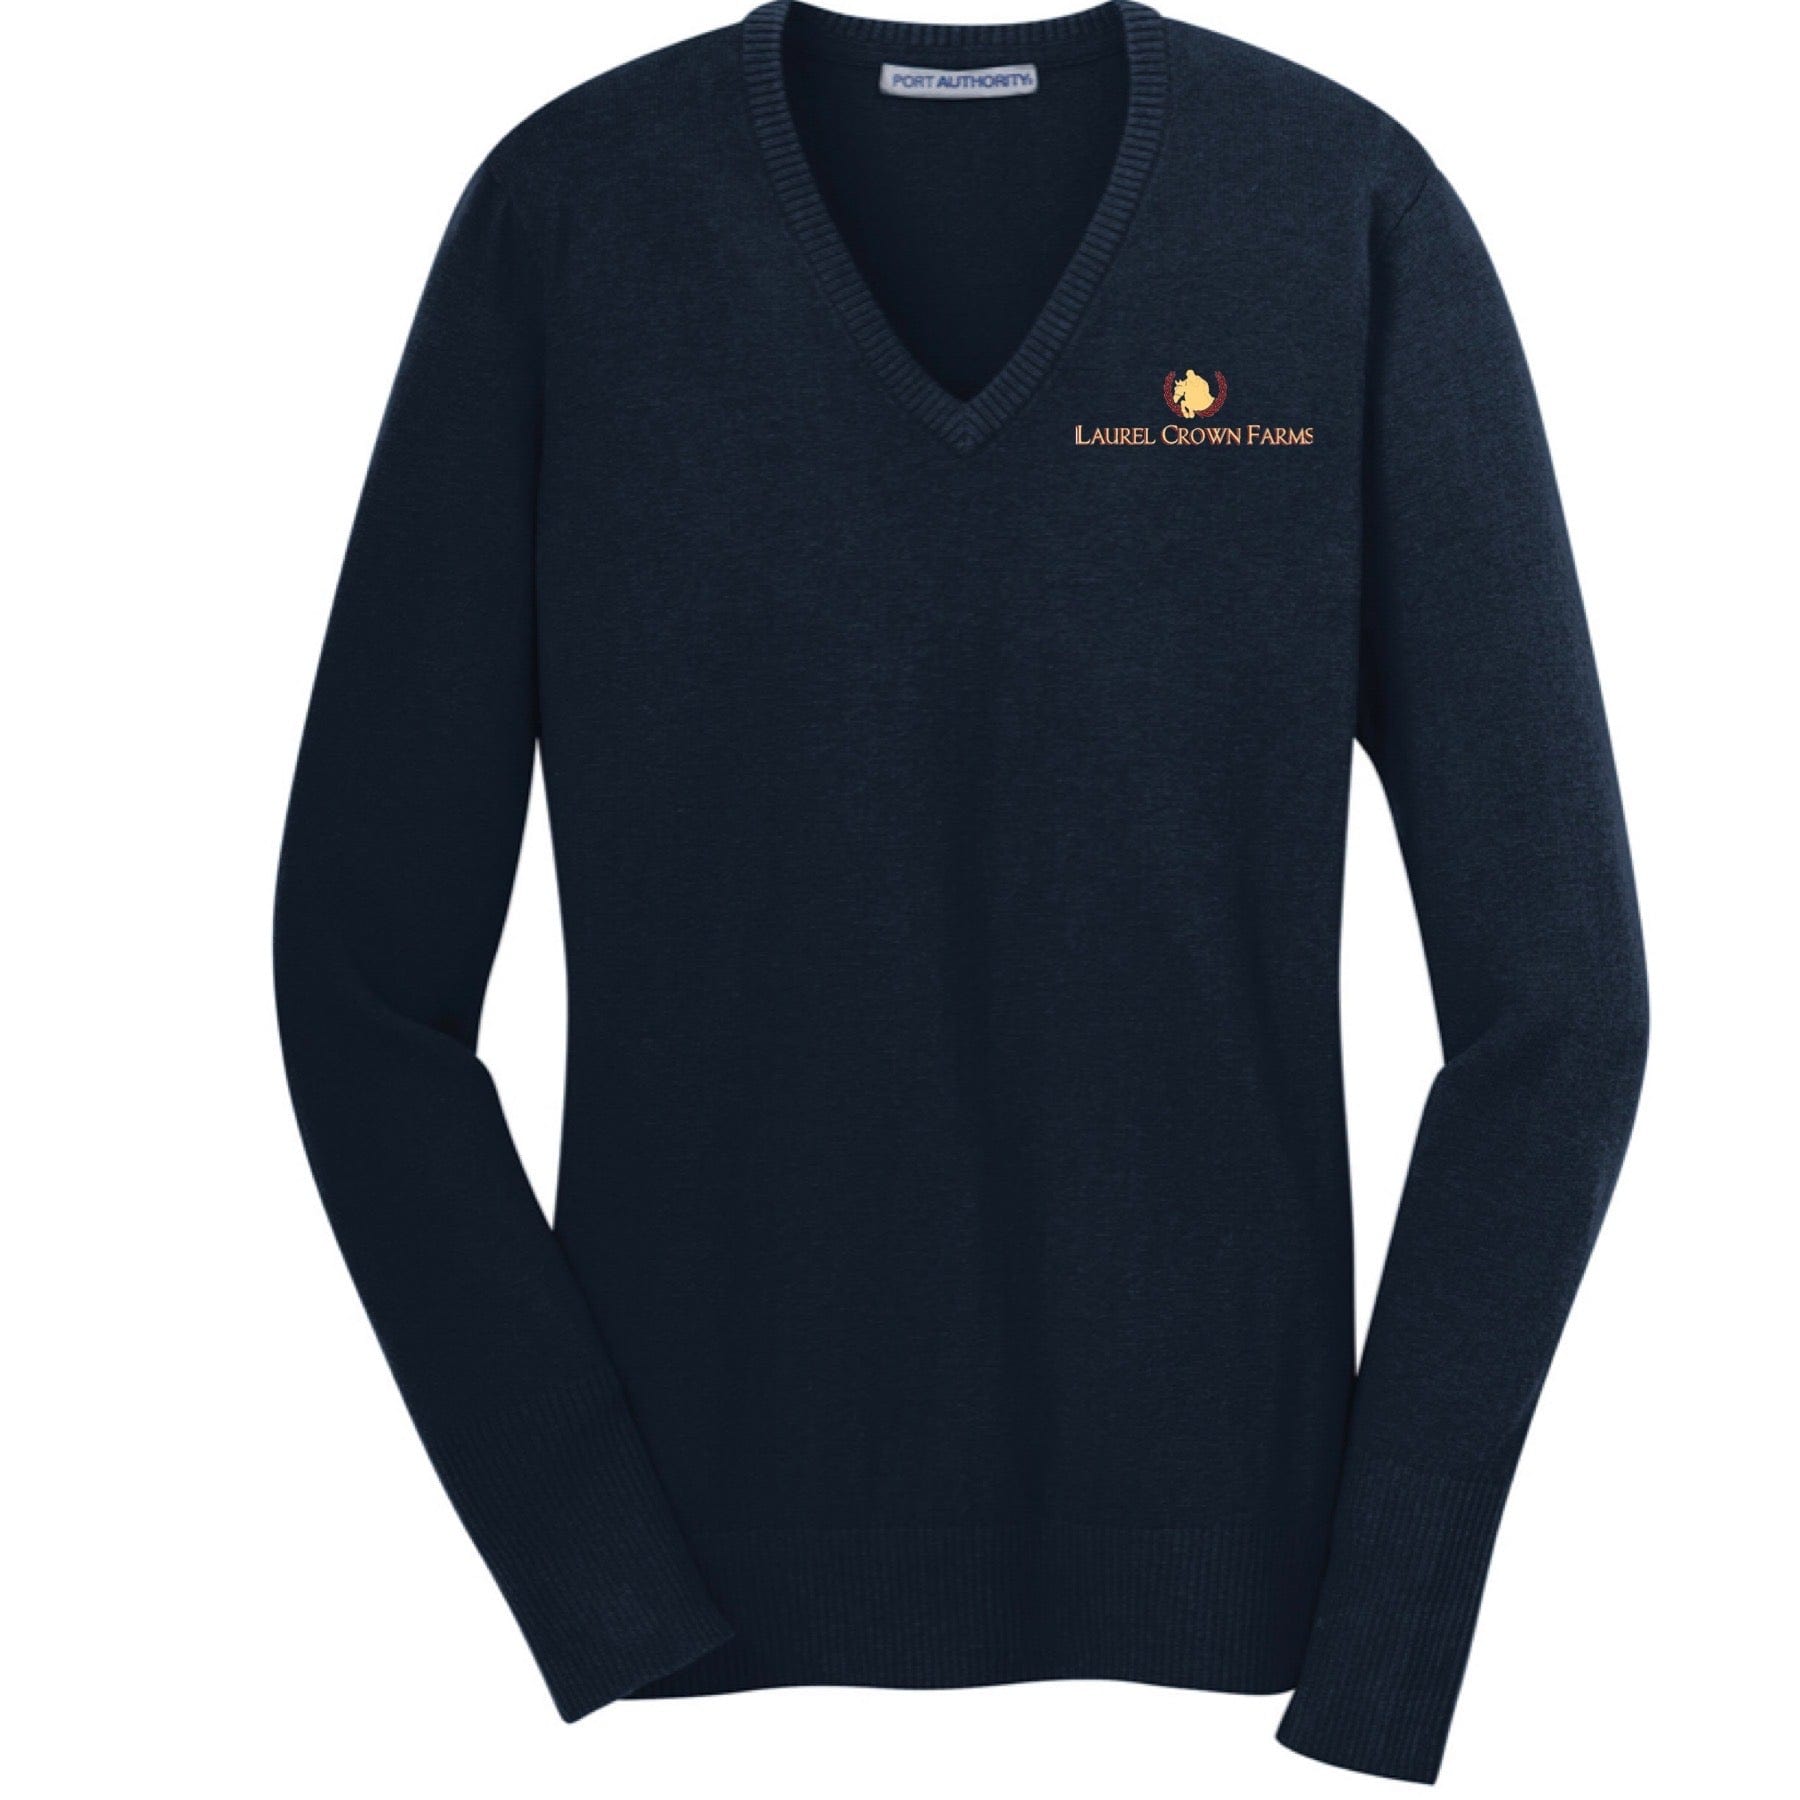 Equestrian Team Apparel Laurel Crown Farms V neck sweater equestrian team apparel online tack store mobile tack store custom farm apparel custom show stable clothing equestrian lifestyle horse show clothing riding clothes horses equestrian tack store